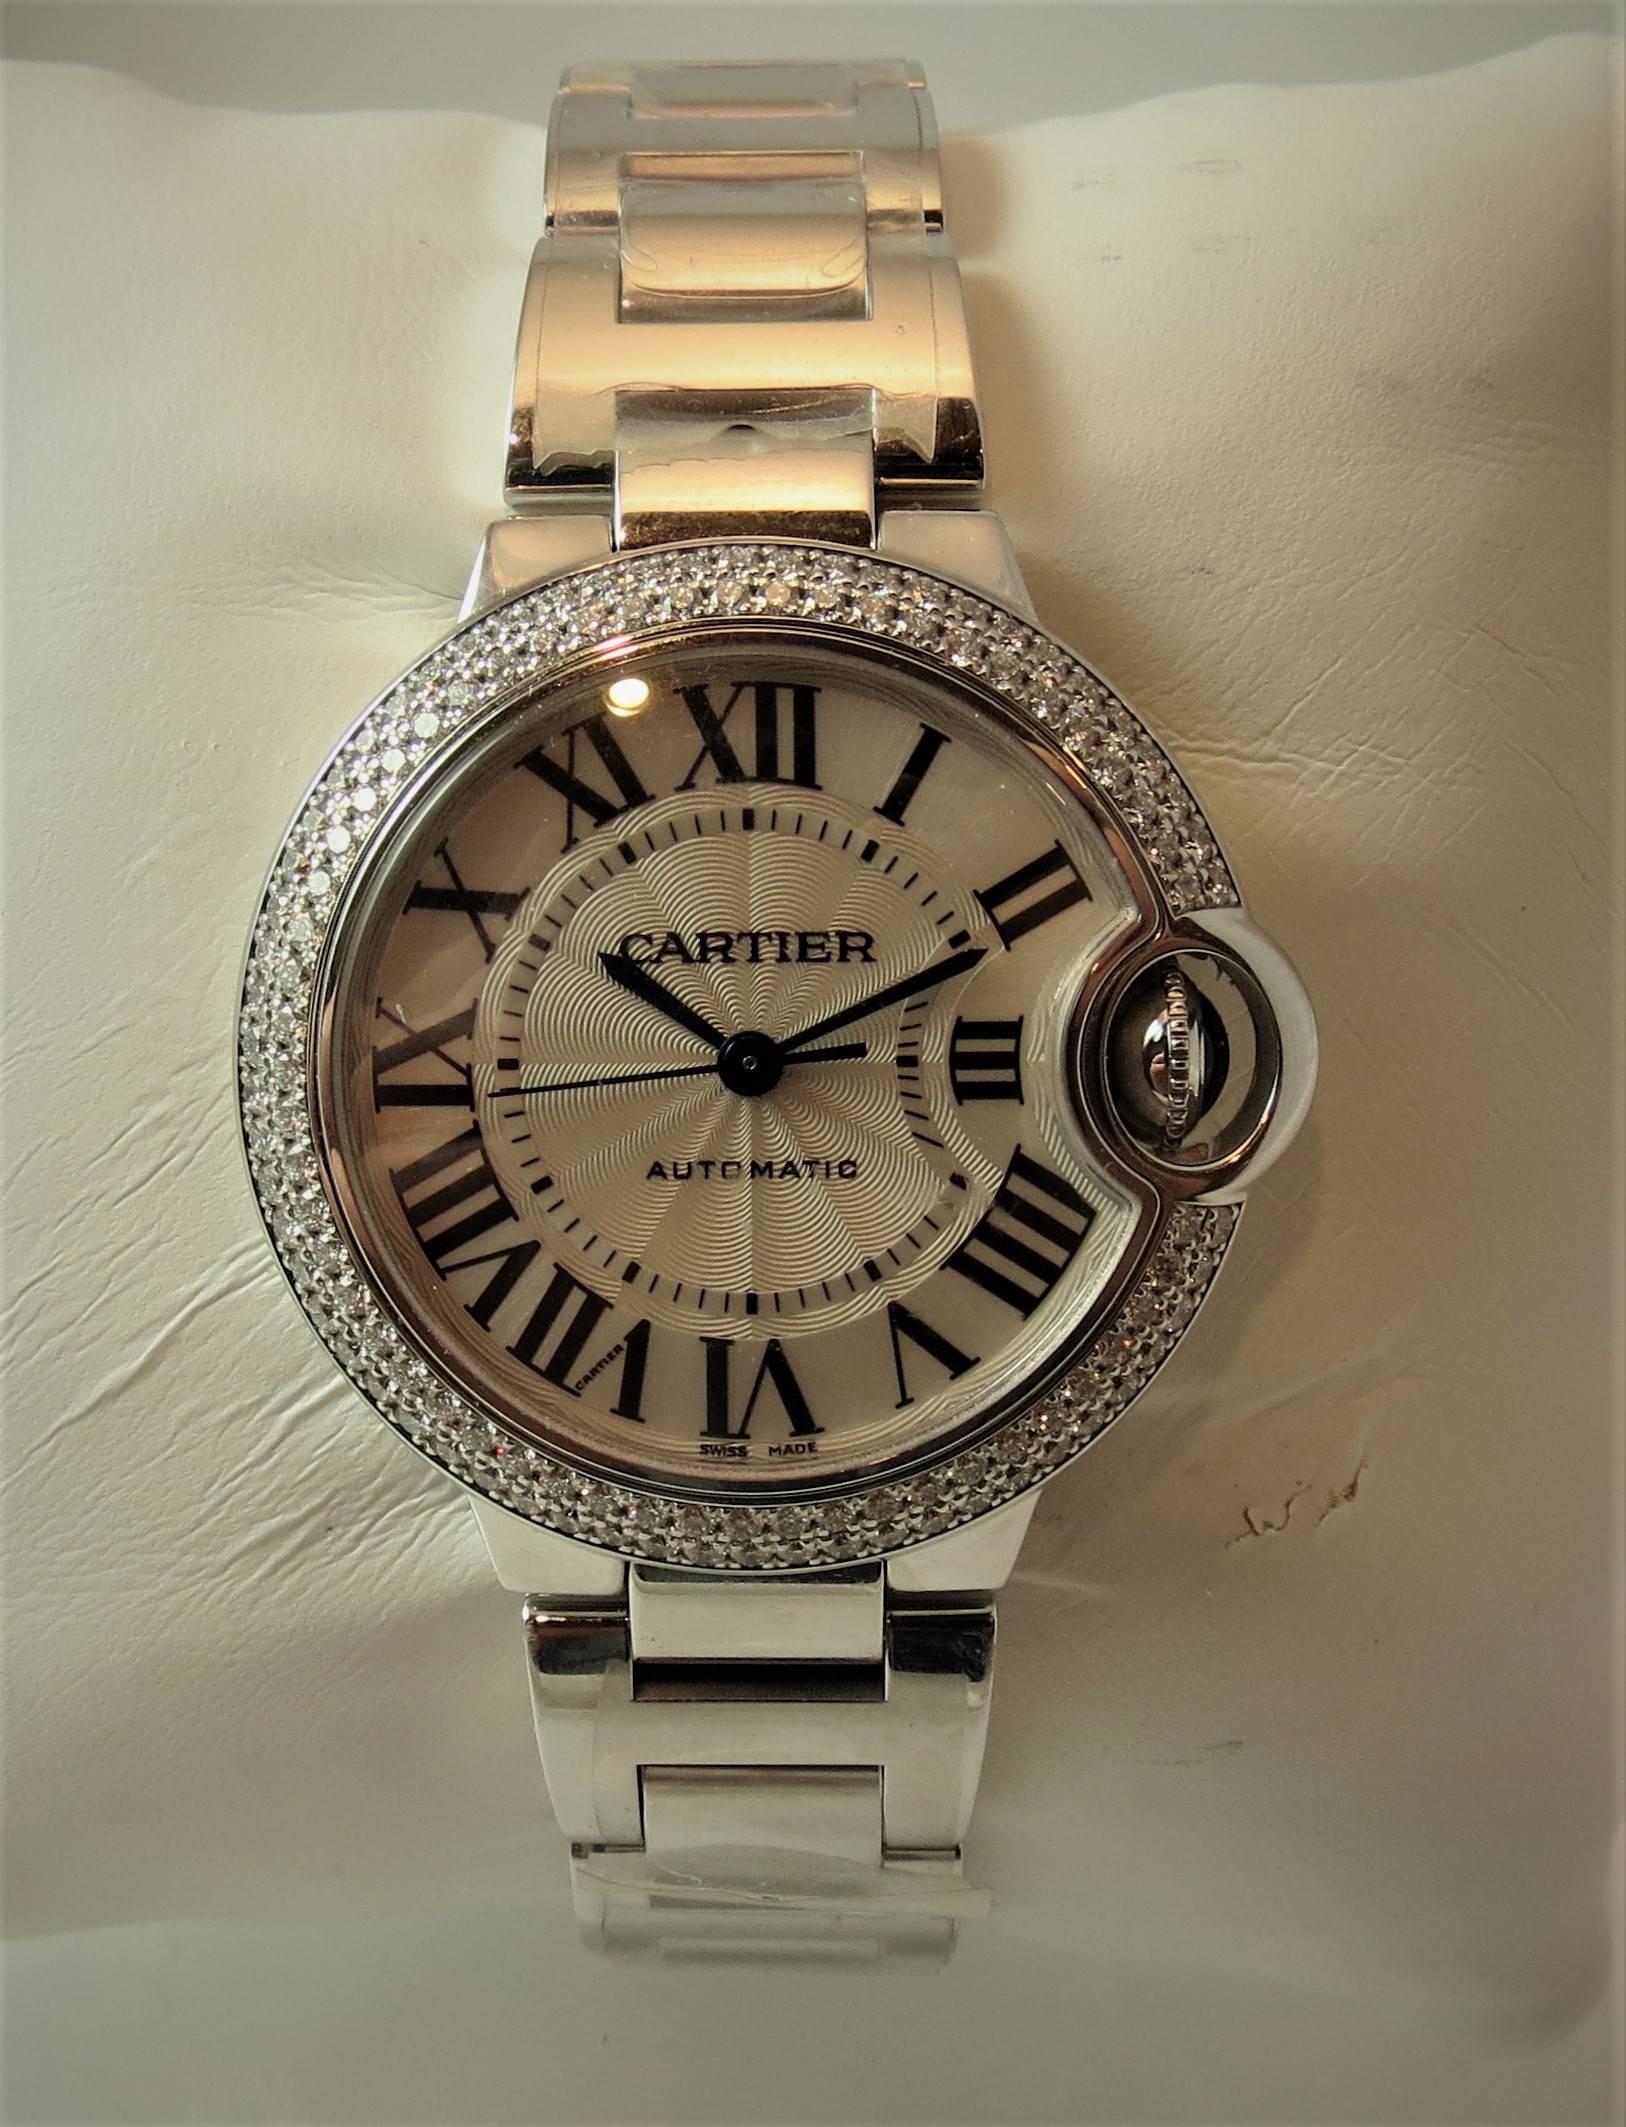 Brand new, never worn, in box, with two year Cartier warranty.
Cartier, Ballon Bleu bracelet watch, 18K white gold, double diamond bezel, Roman numerals, sweep second, 33mm, automatic movement.

Current retail $ 37,500
